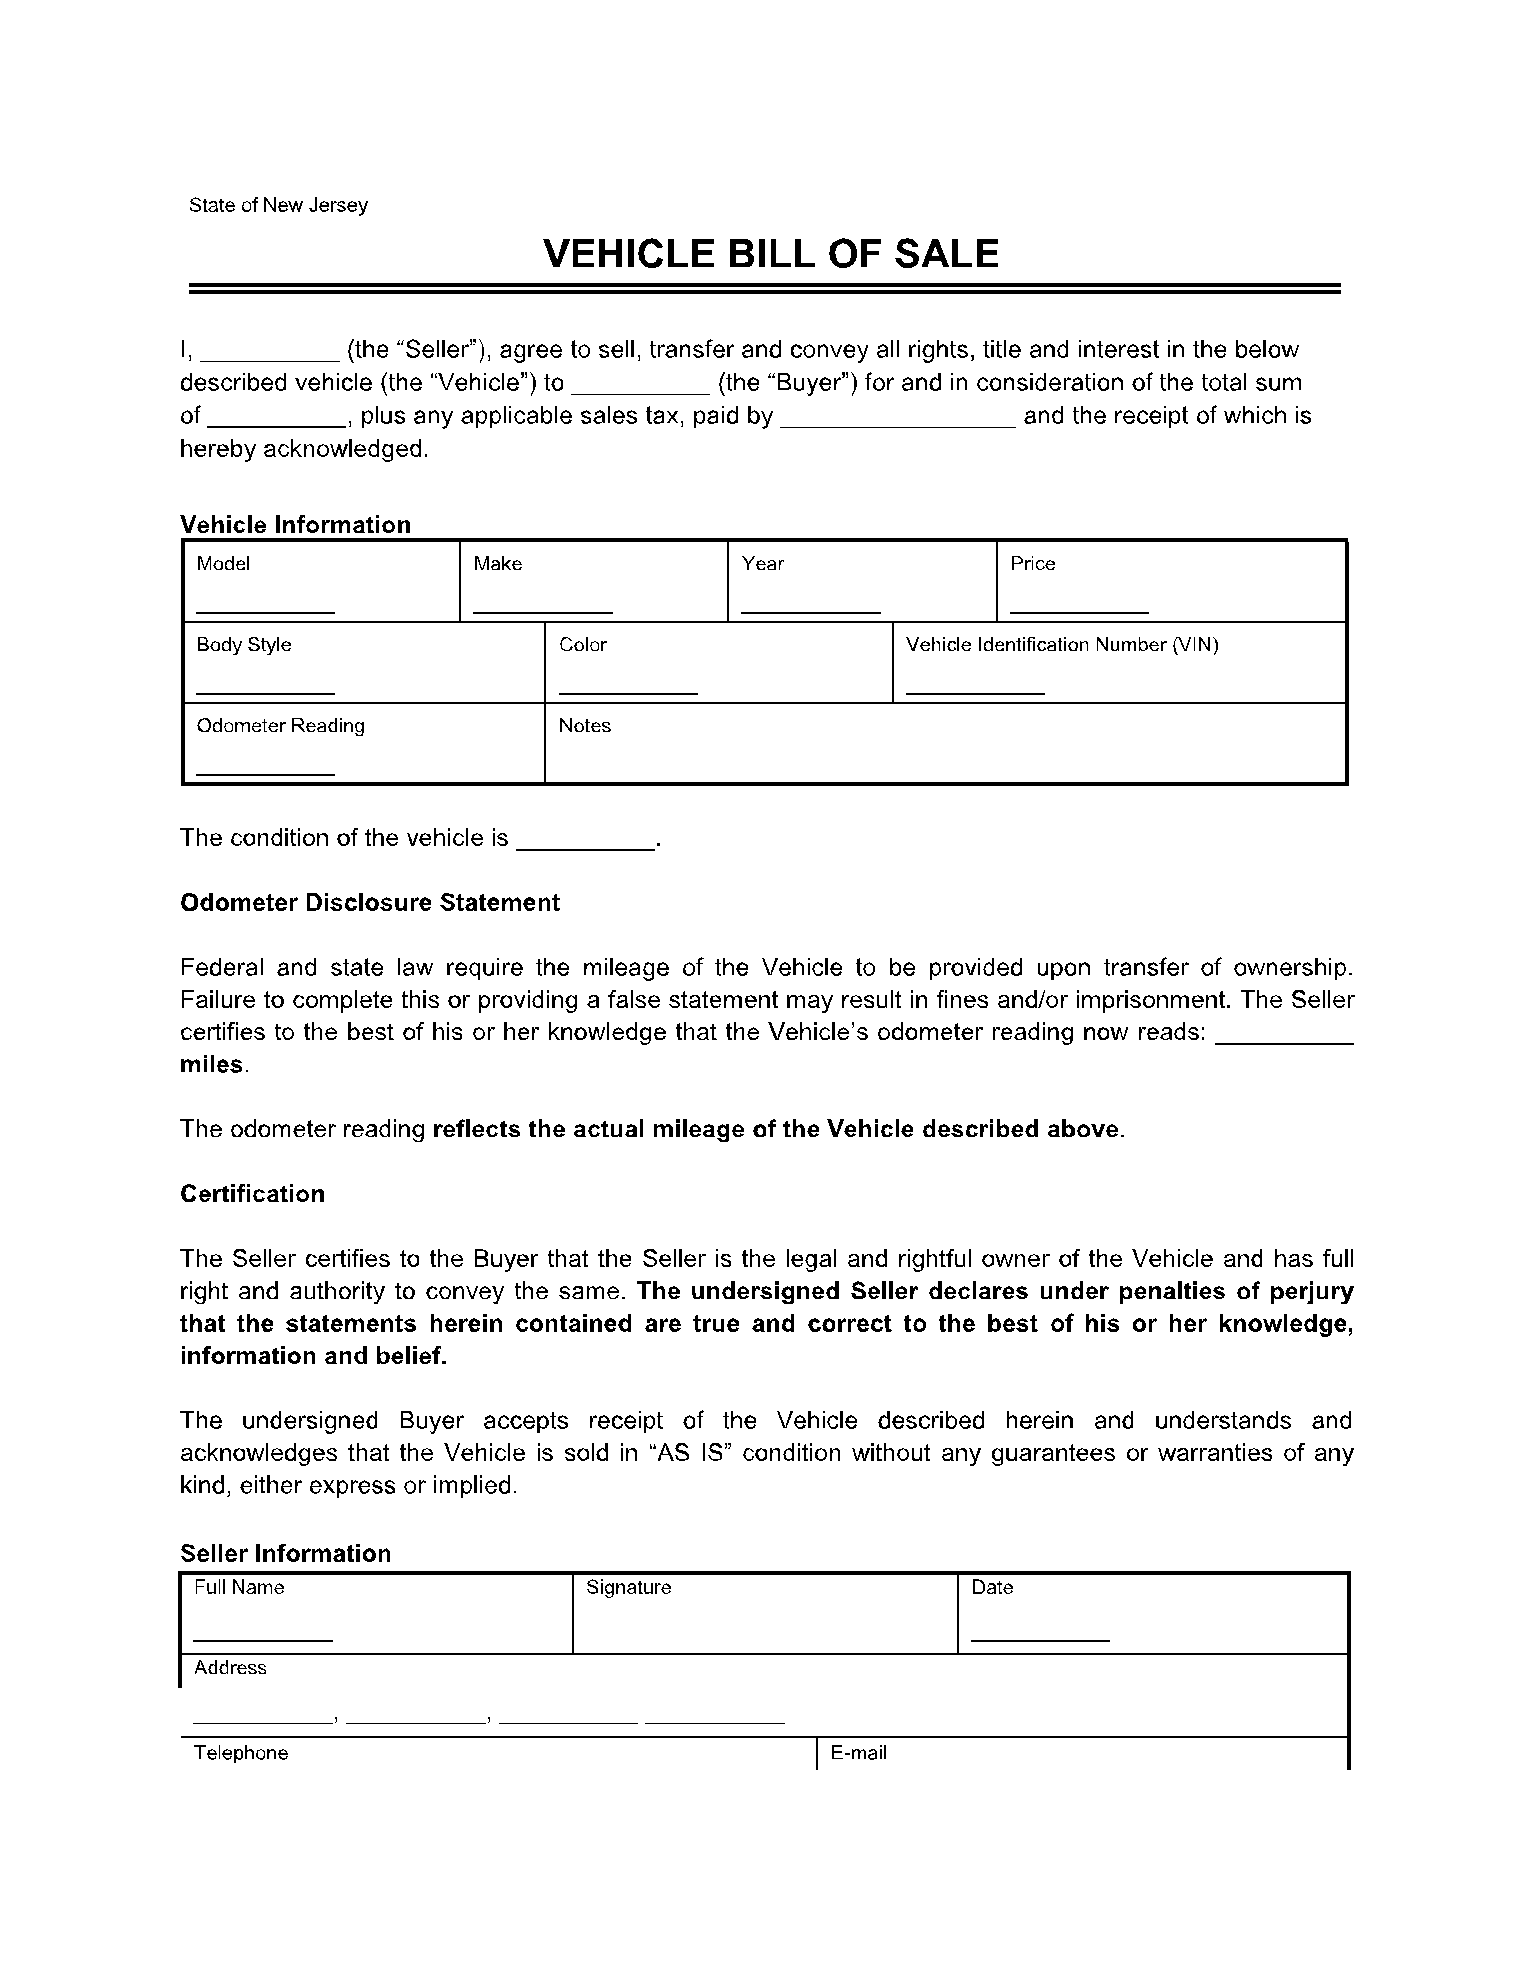 New Jersey Vehicle Bill of Sale Form